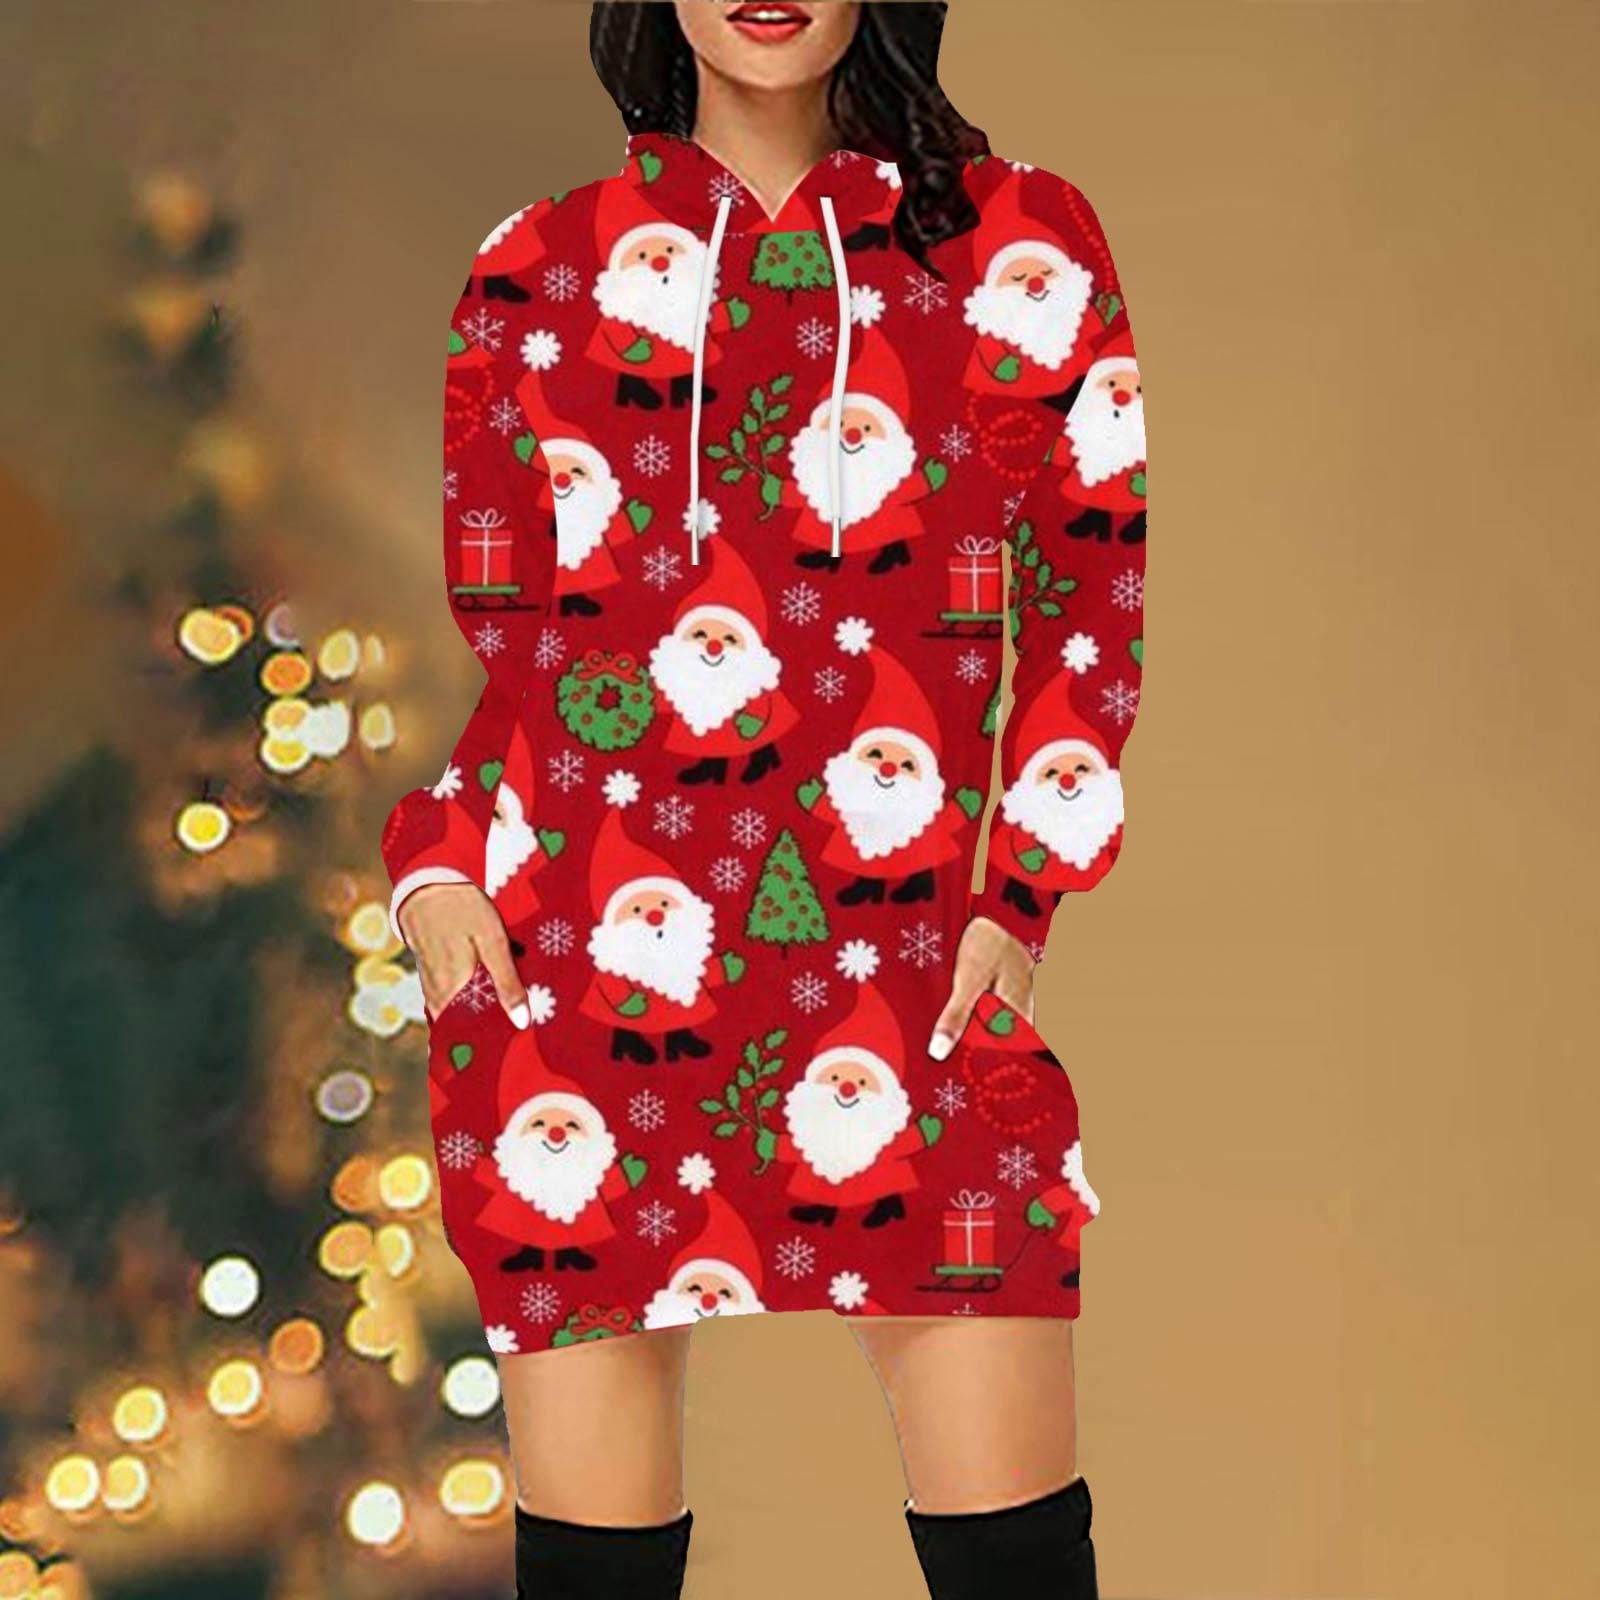  Best Gifts Under 15 Dollars, Funny Christmas Dresses for Women  Cute Xmas Print Sweatshirt Dress Casual Long Sleeve Hoodie Pullover with  Pockets Festive Holiday Sweaters for Women : Sports & Outdoors